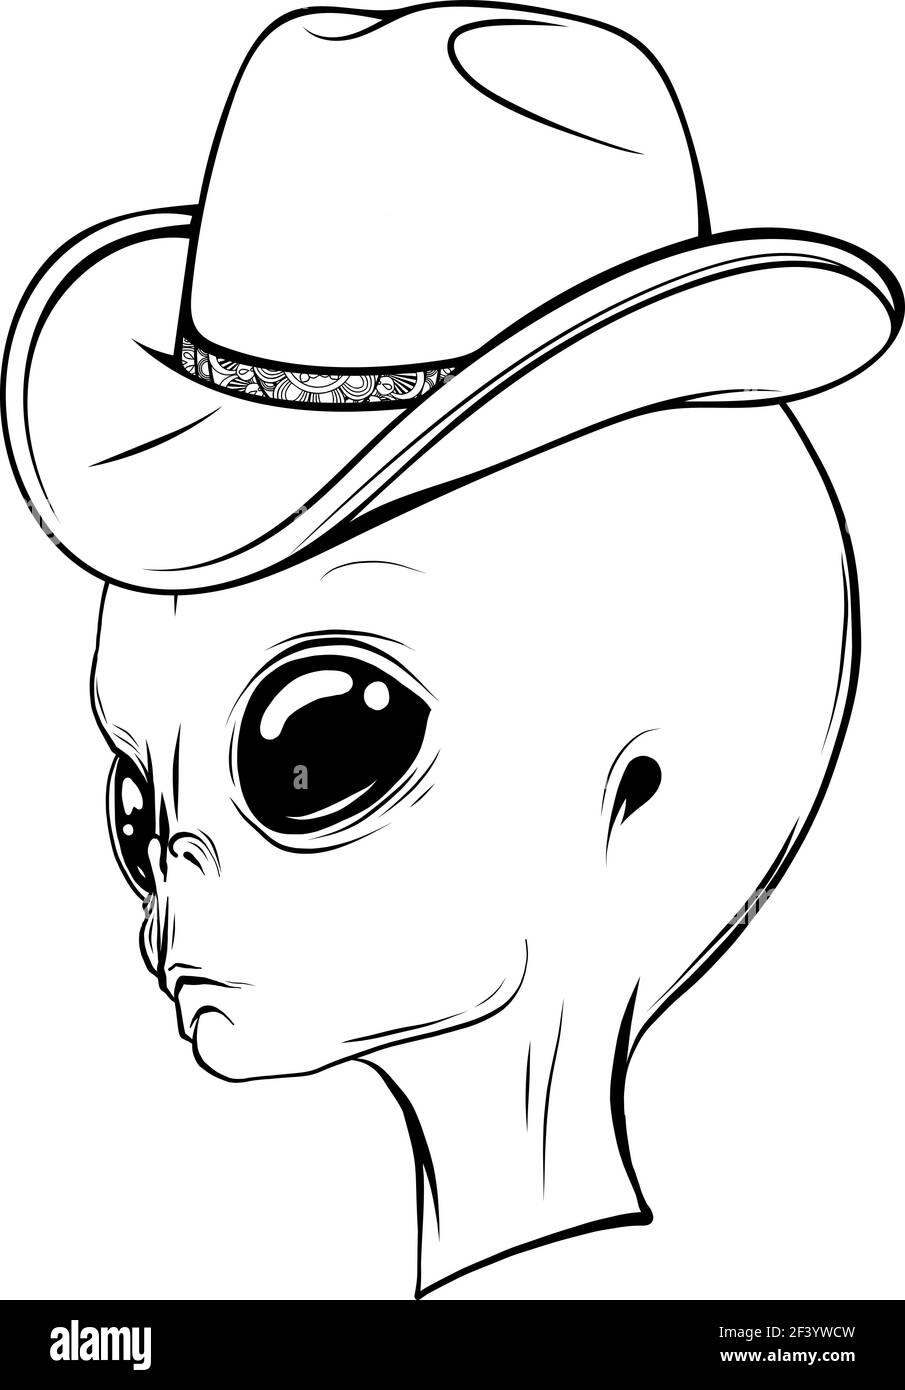 draw in black and white of alien head with hat vector illustration design Stock Vector